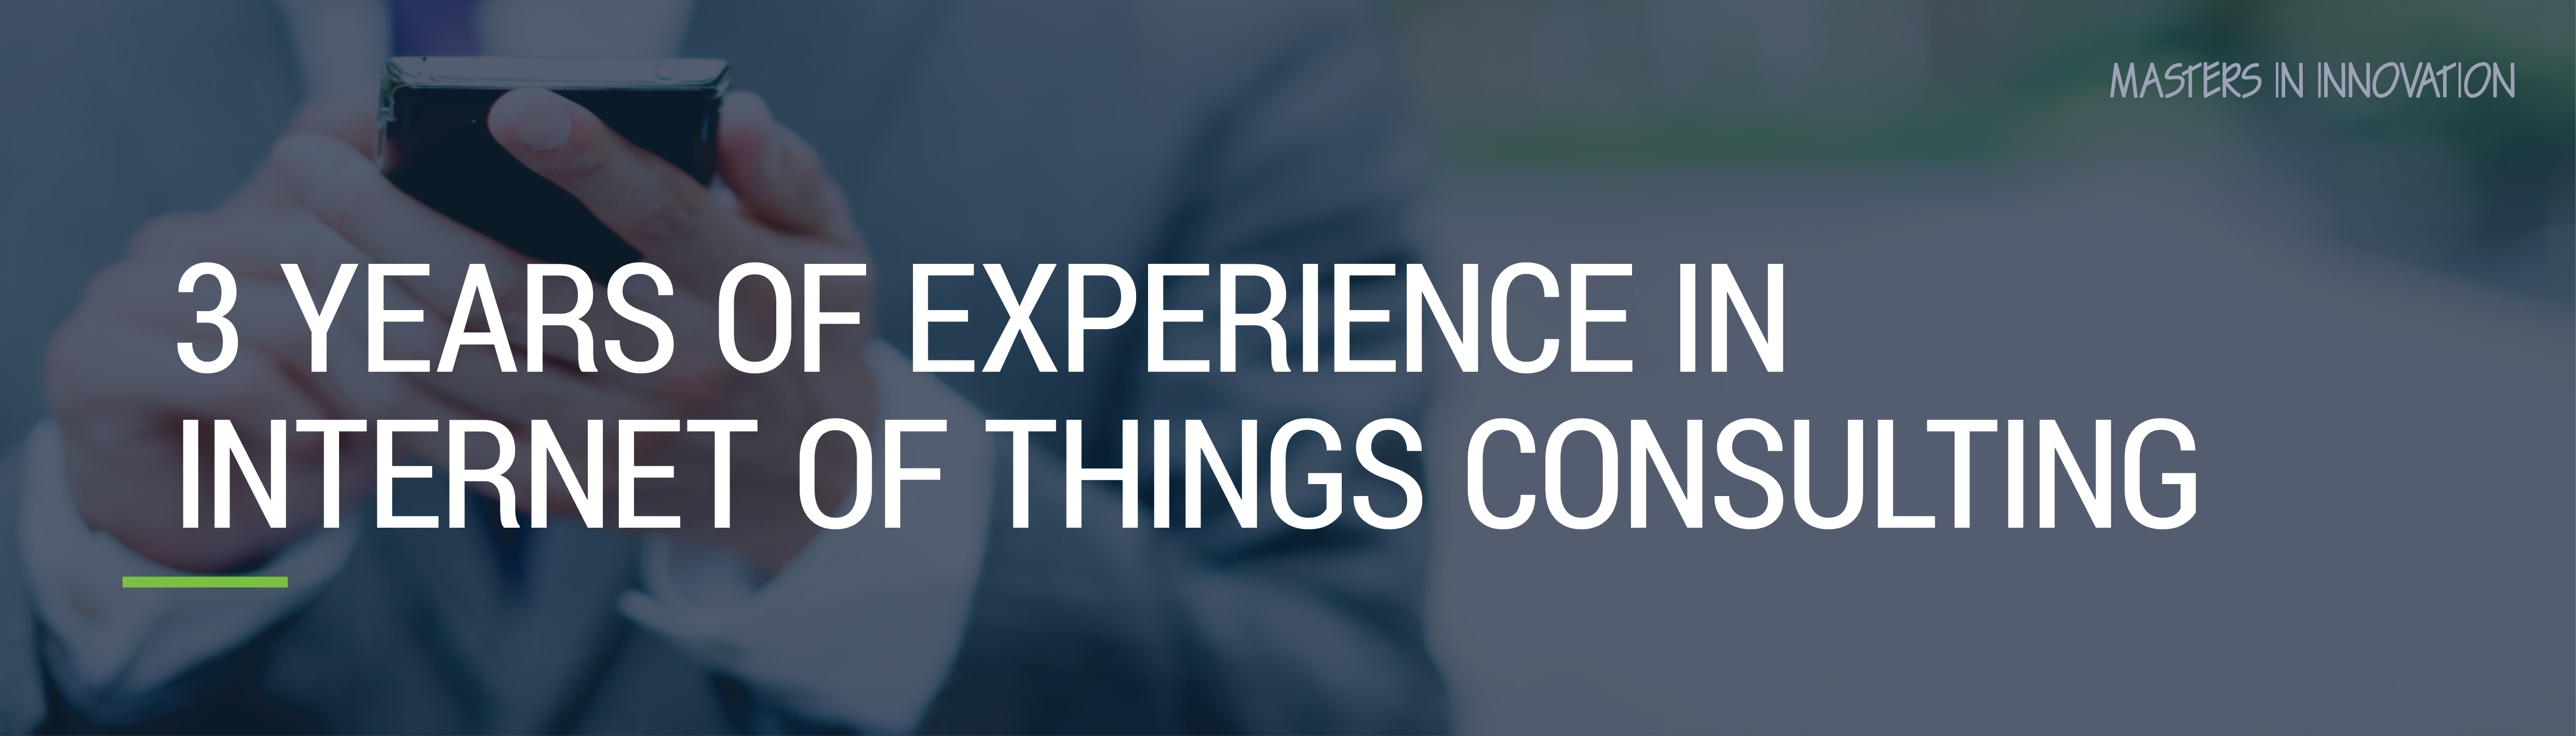 3y Experience IoT - Infographic-02